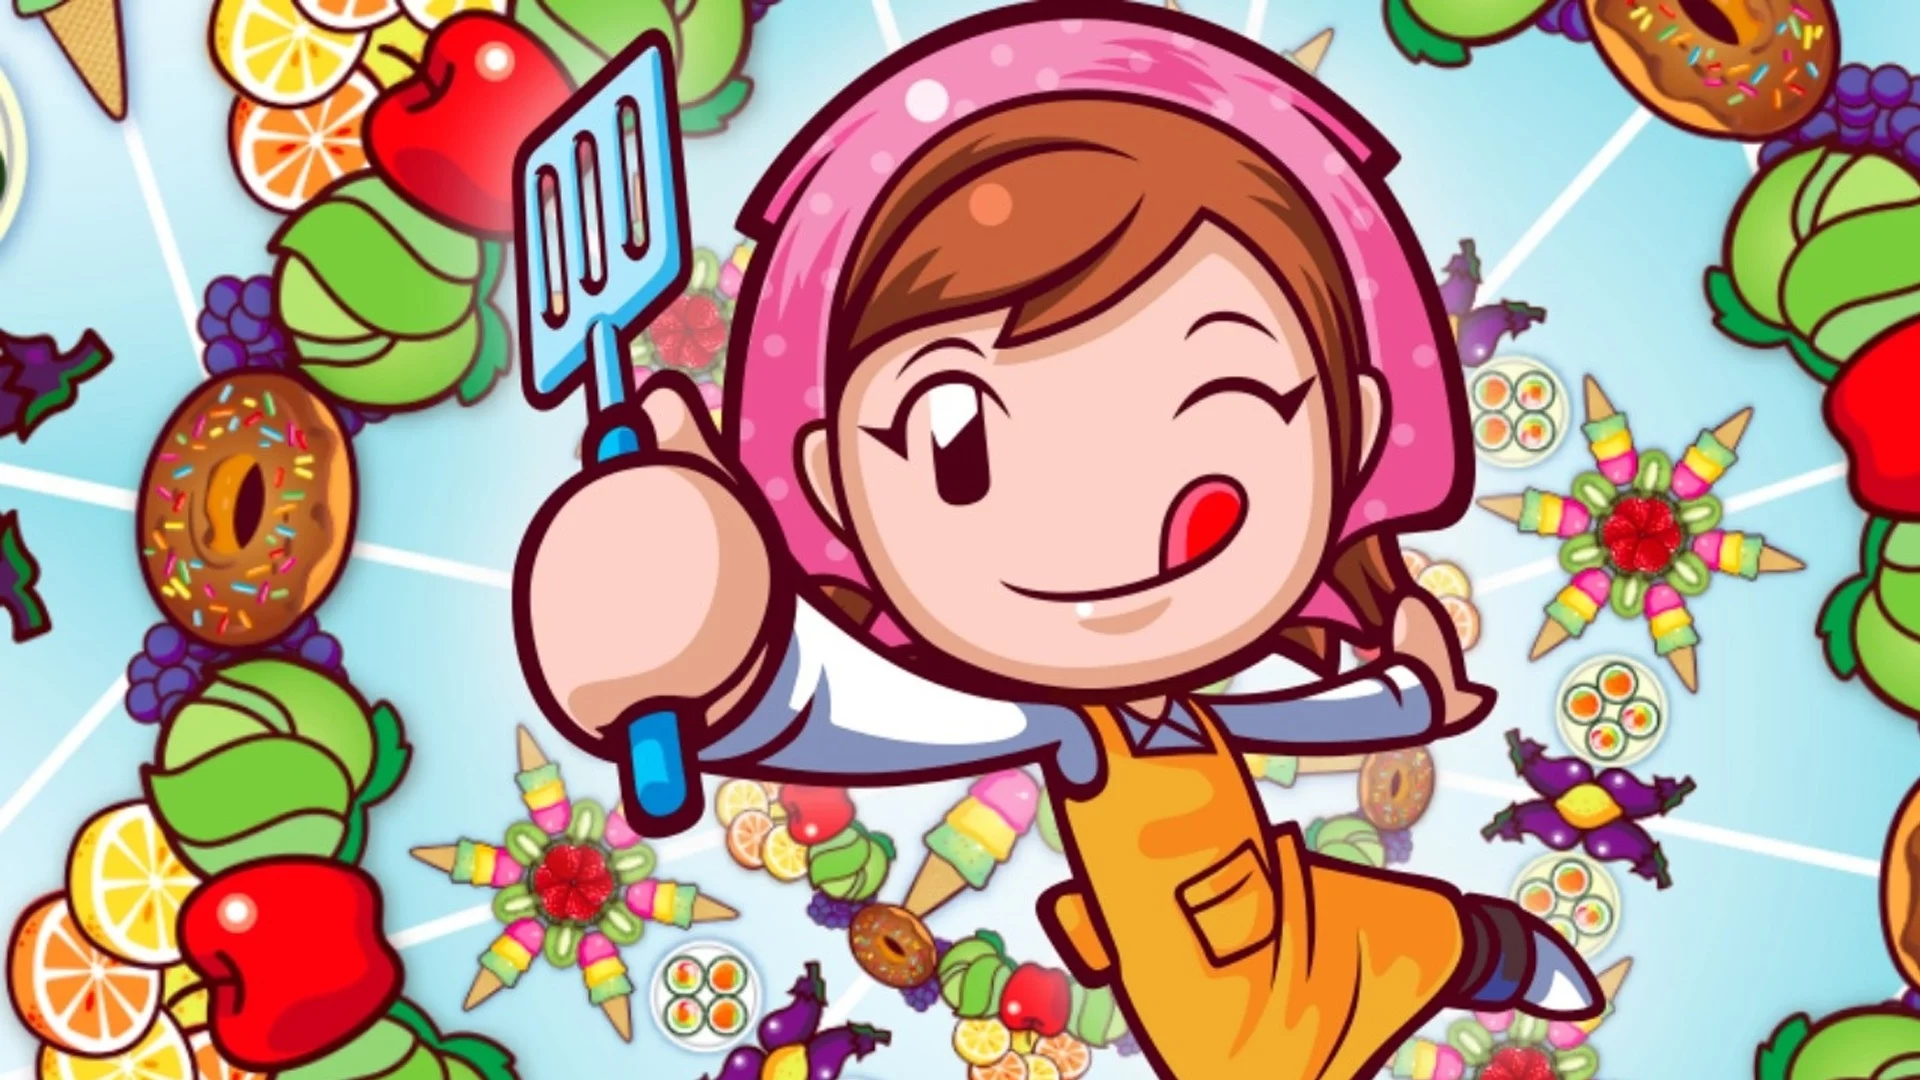 A new Cooking Mama game may be coming to PS4 and Nintendo Switch